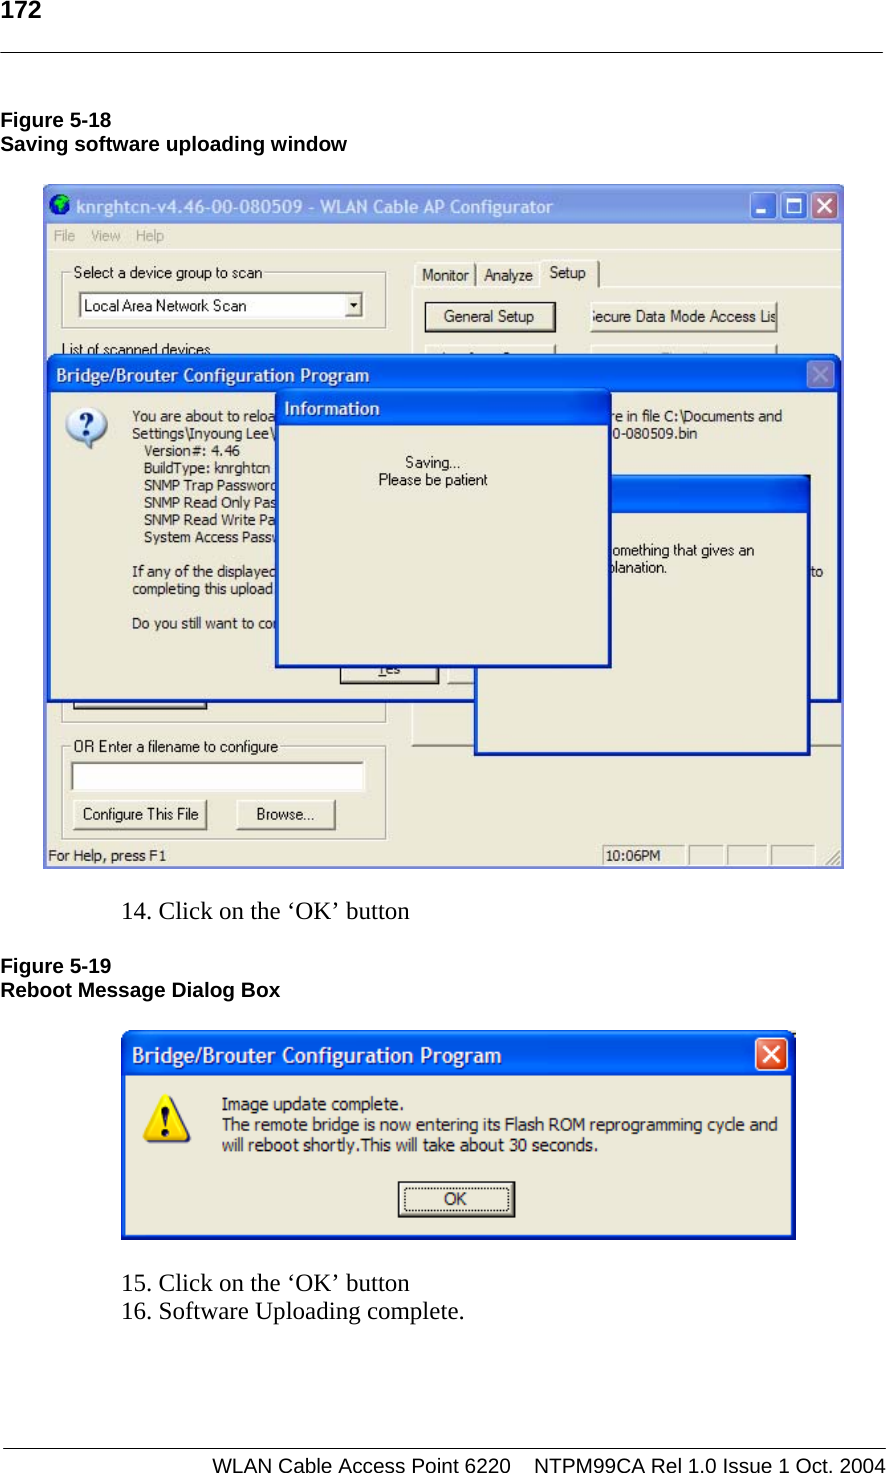   172    Figure 5-18 Saving software uploading window    14. Click on the ‘OK’ button  Figure 5-19 Reboot Message Dialog Box    15. Click on the ‘OK’ button 16. Software Uploading complete.    WLAN Cable Access Point 6220    NTPM99CA Rel 1.0 Issue 1 Oct. 2004